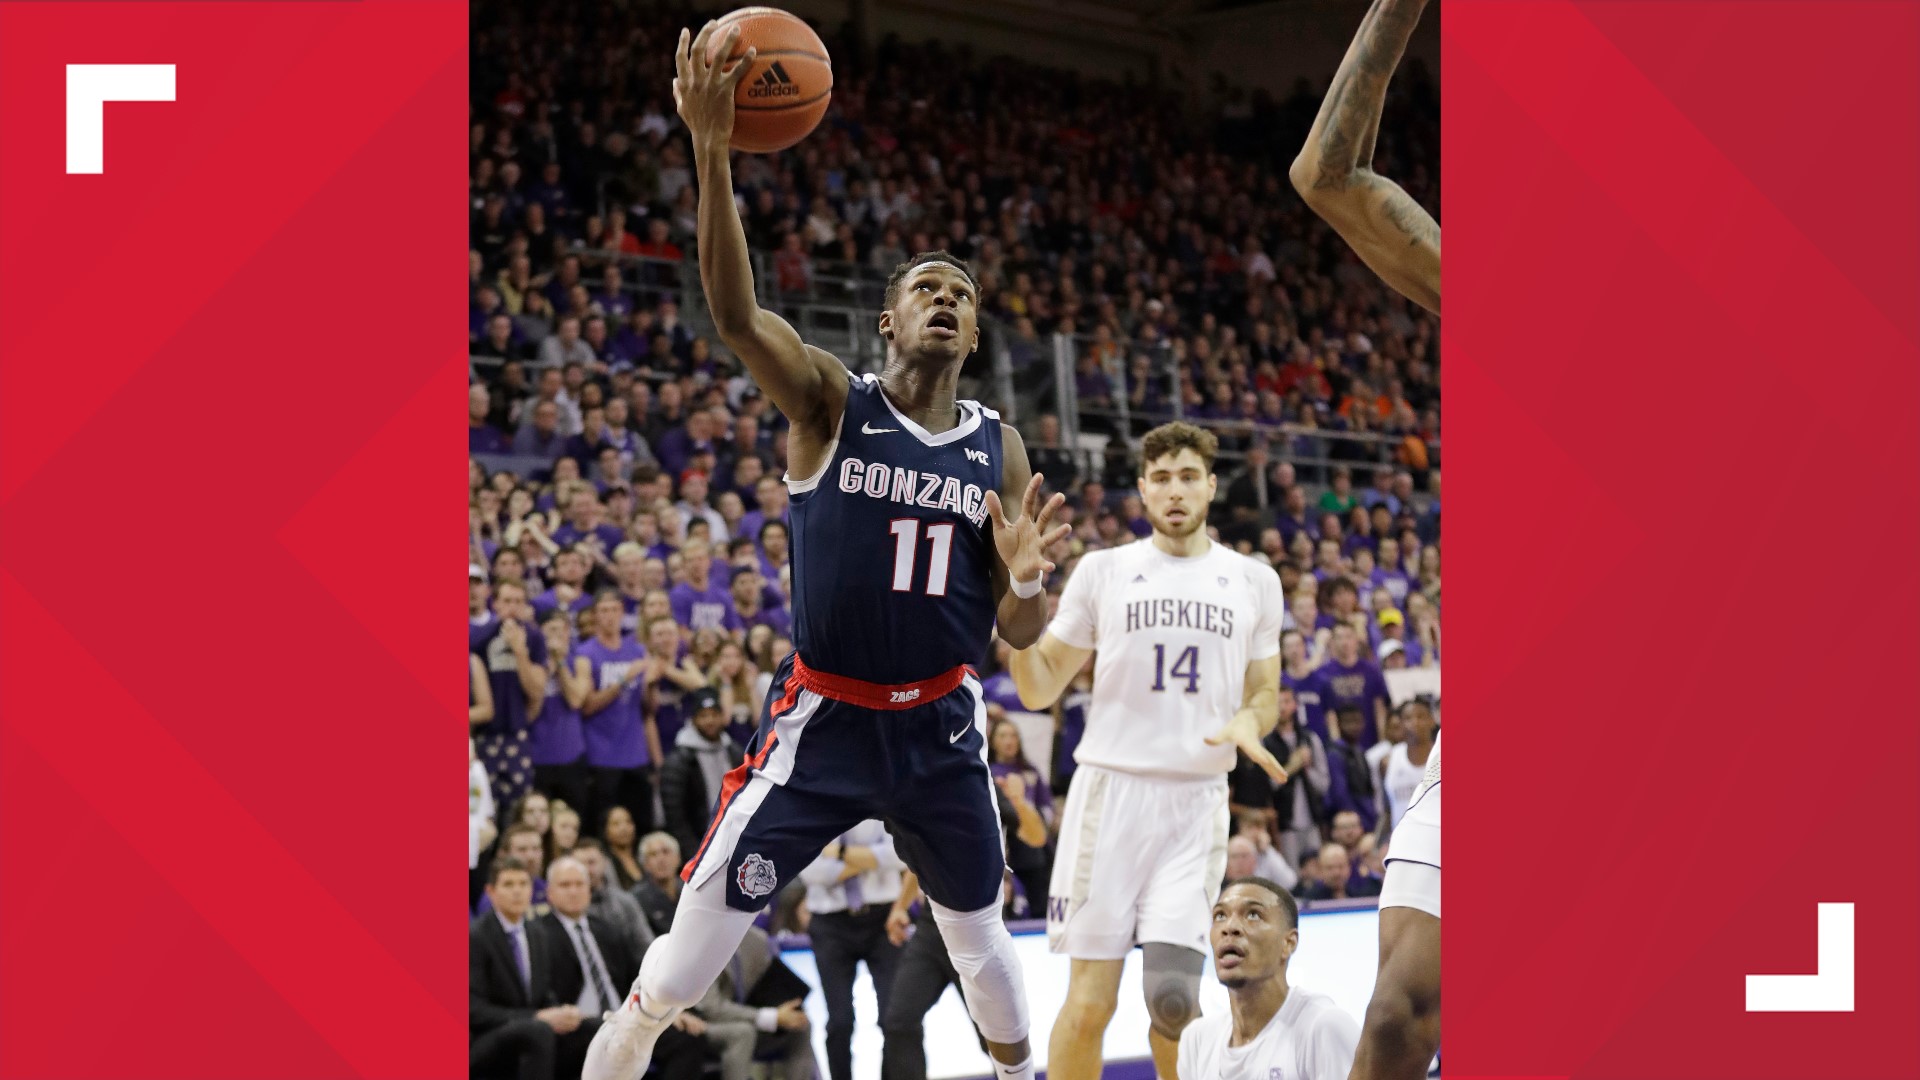 Joel Ayayi hits a big three with 24 seconds to go to seal the win for the Zags.